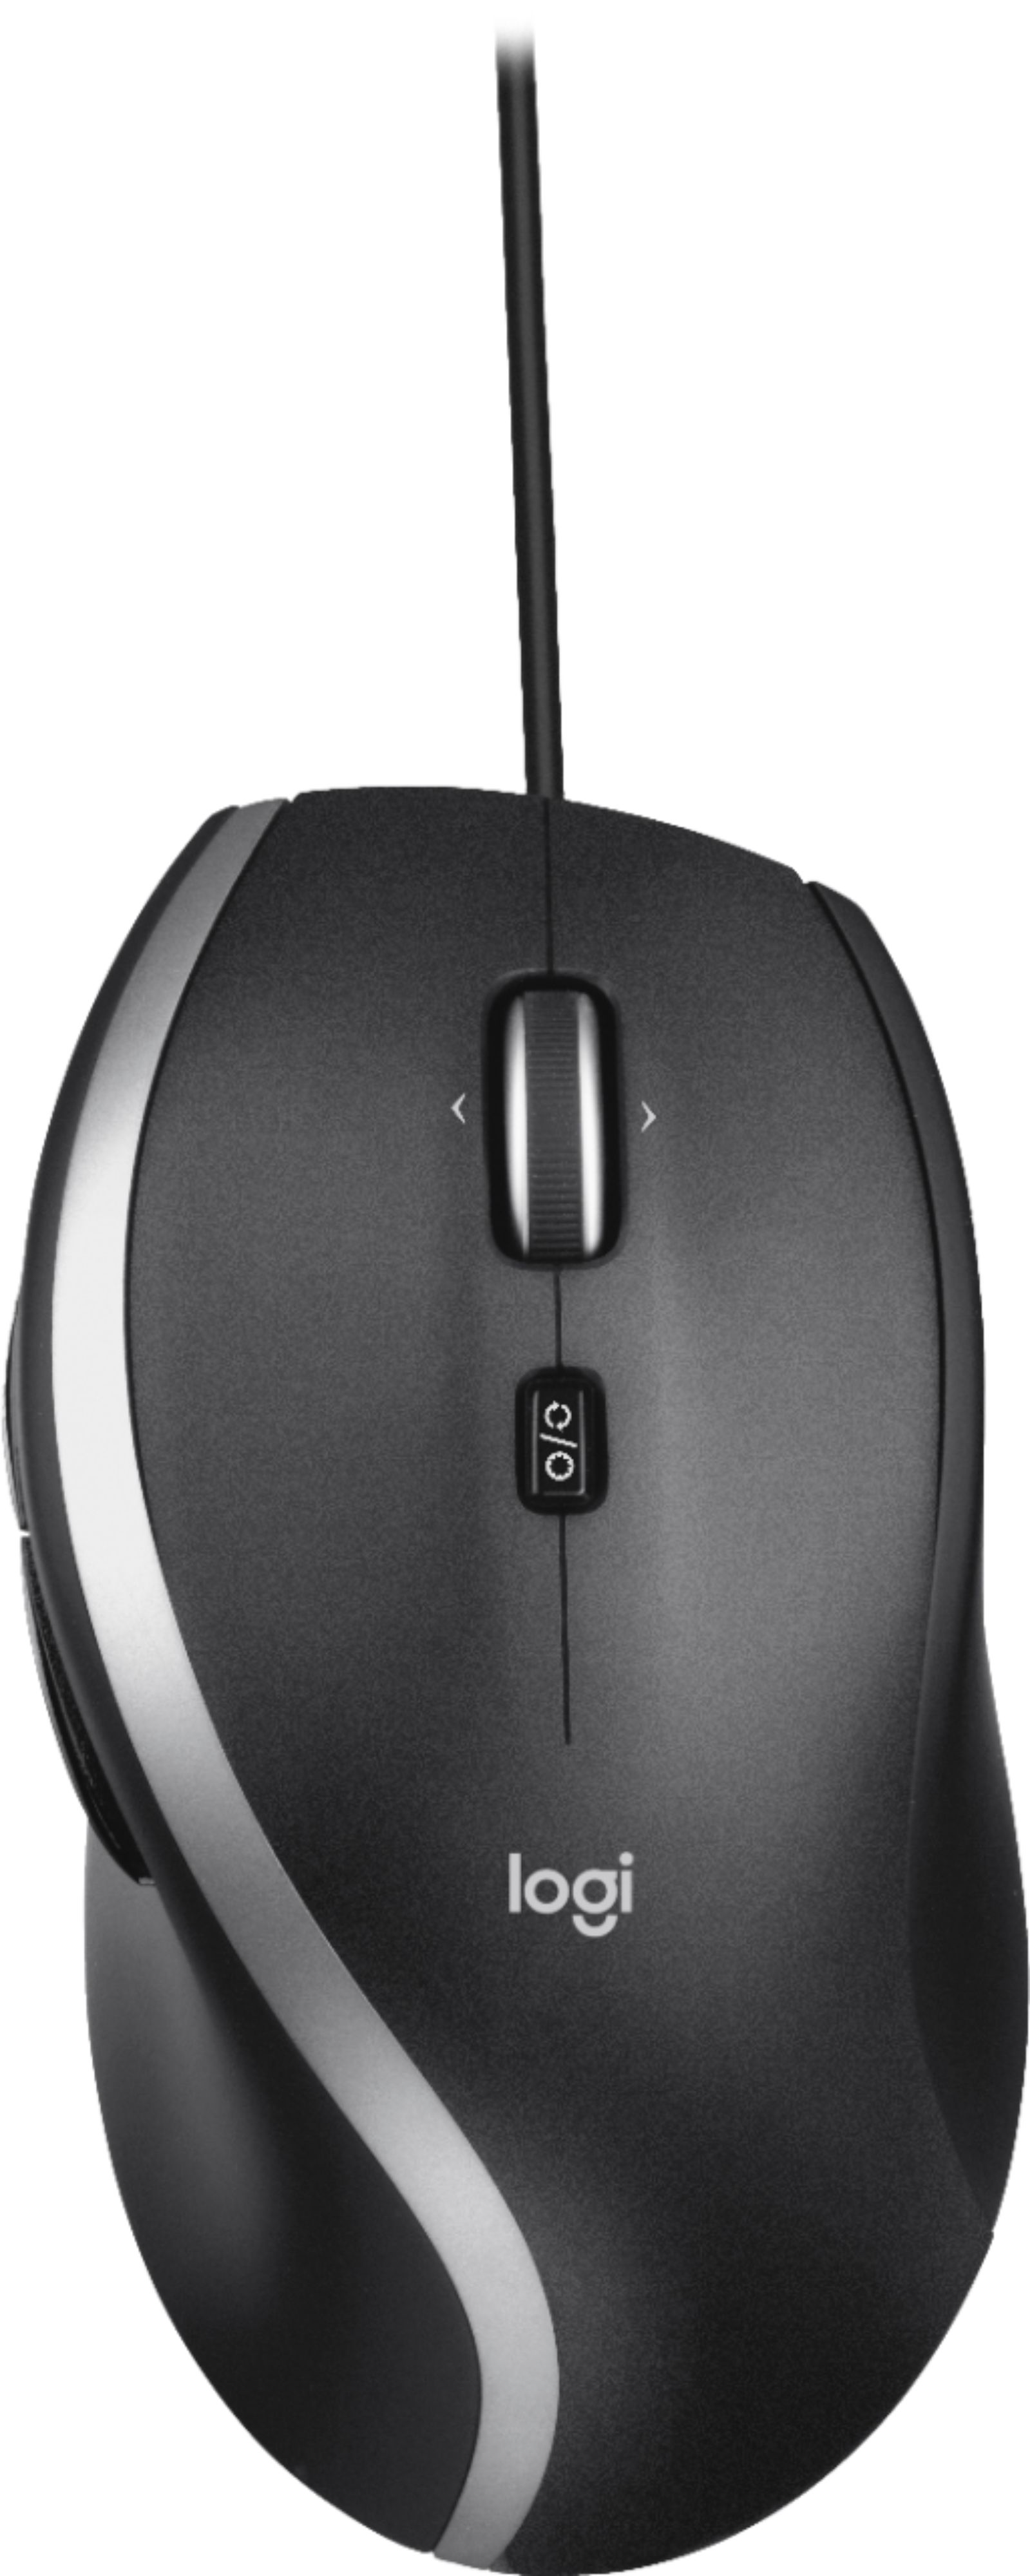 Logitech - M500s Advanced Wired Optical Mouse with Hyper-fast Scrolling & Tilt - Black